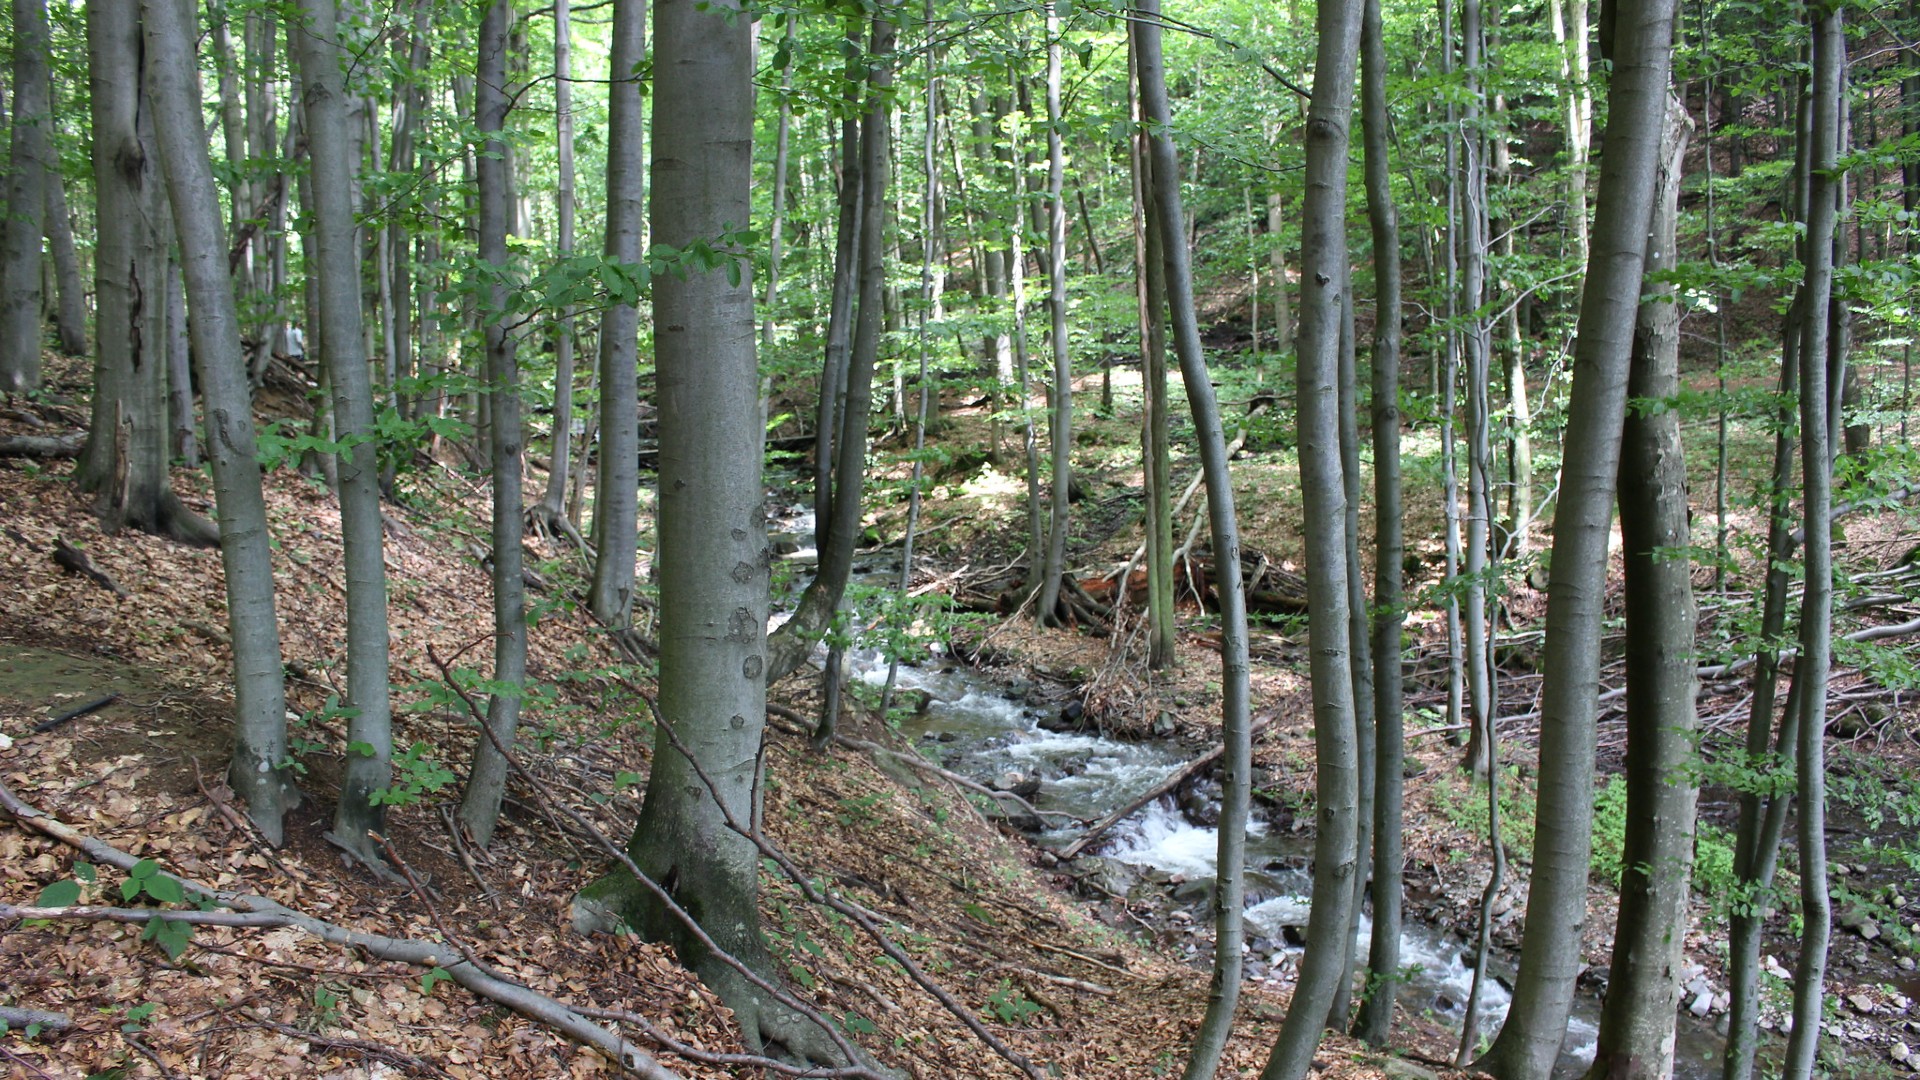 beech trunks with green leaves in forest with creek running through